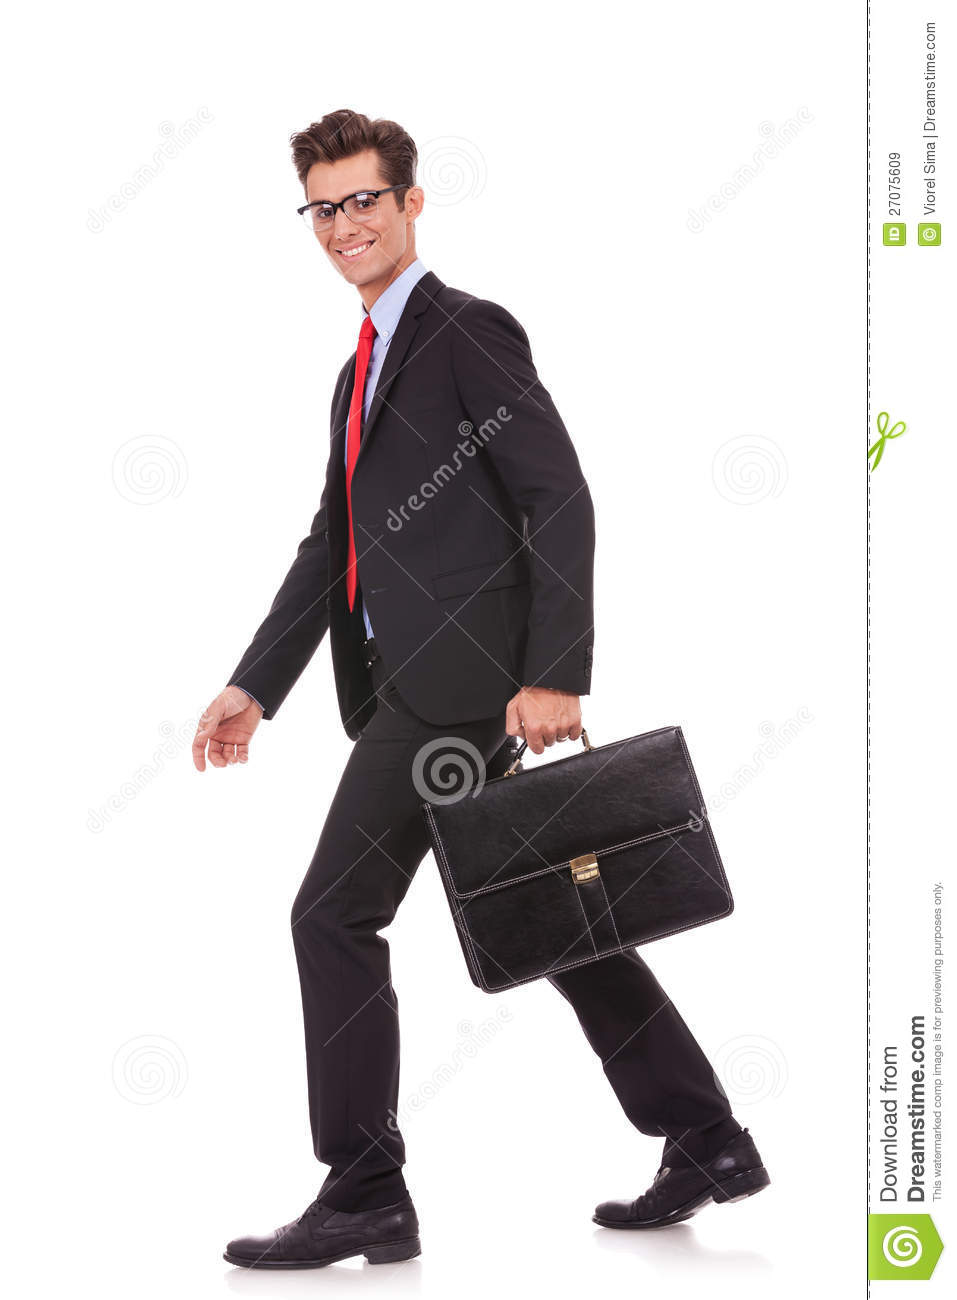 Business Man Walking with Briefcase